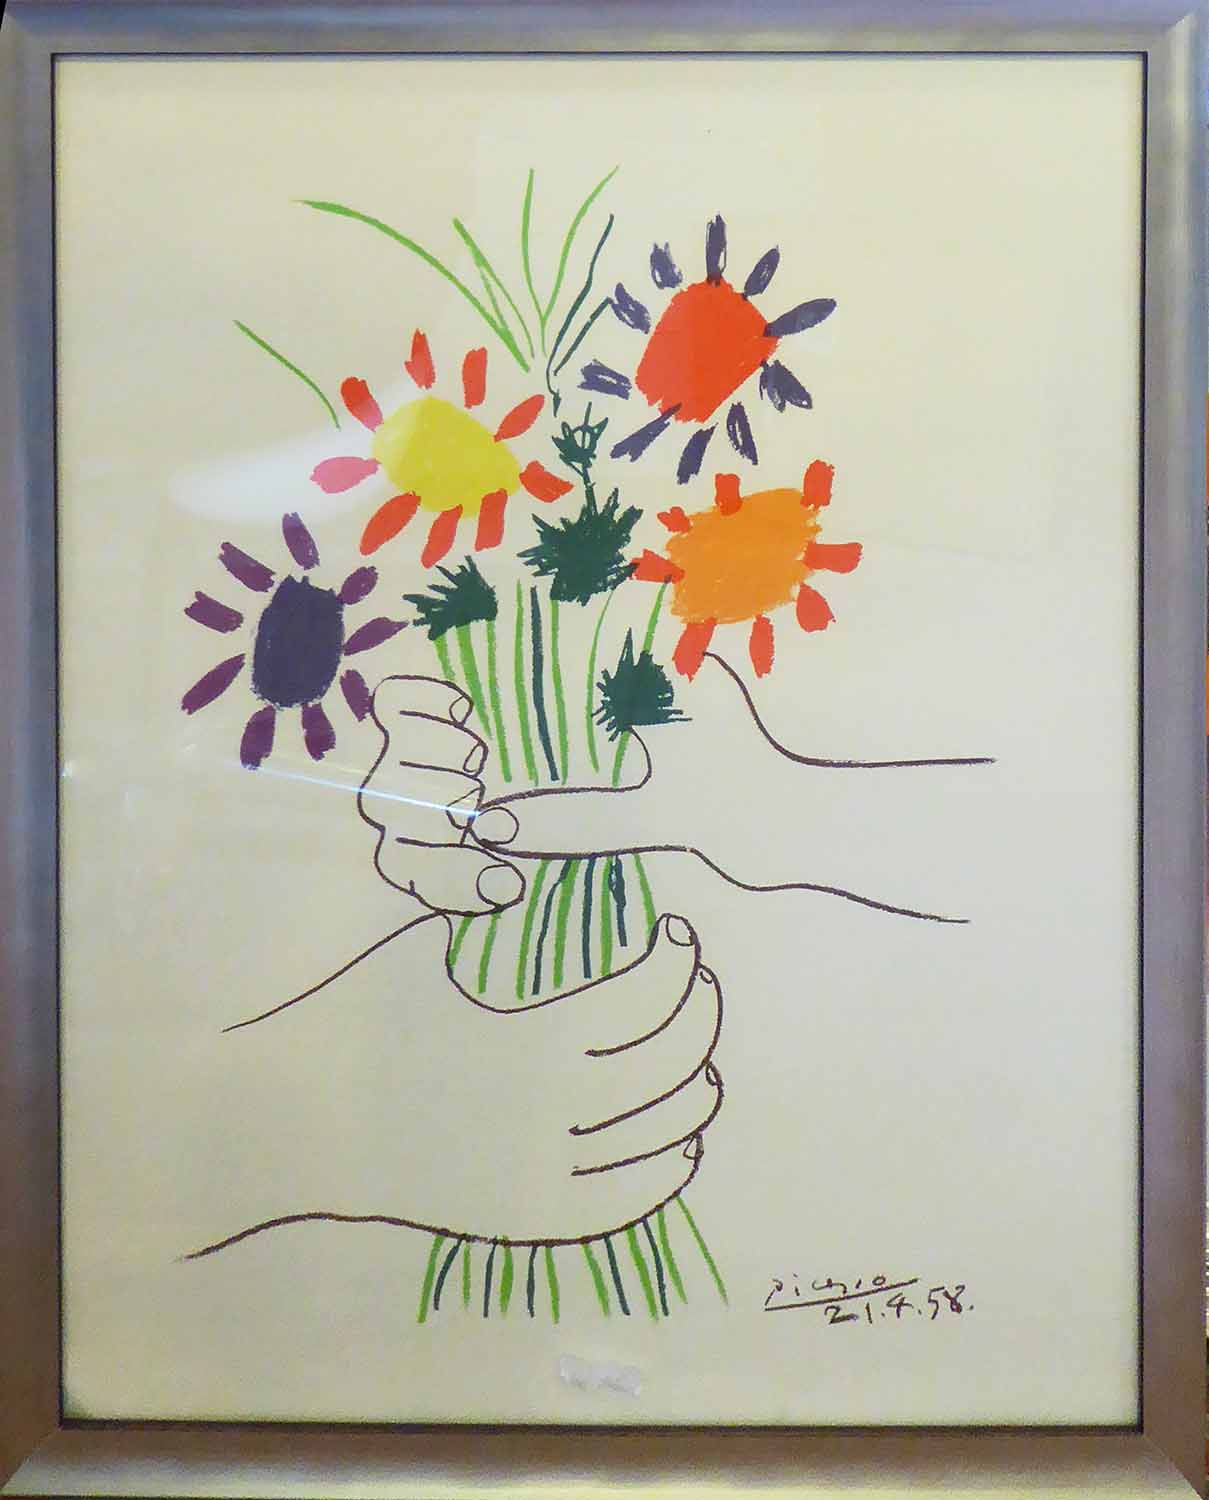 AFTER PICASSO 'Flowers', lithograph in colours, 65cm x 48cm, framed.